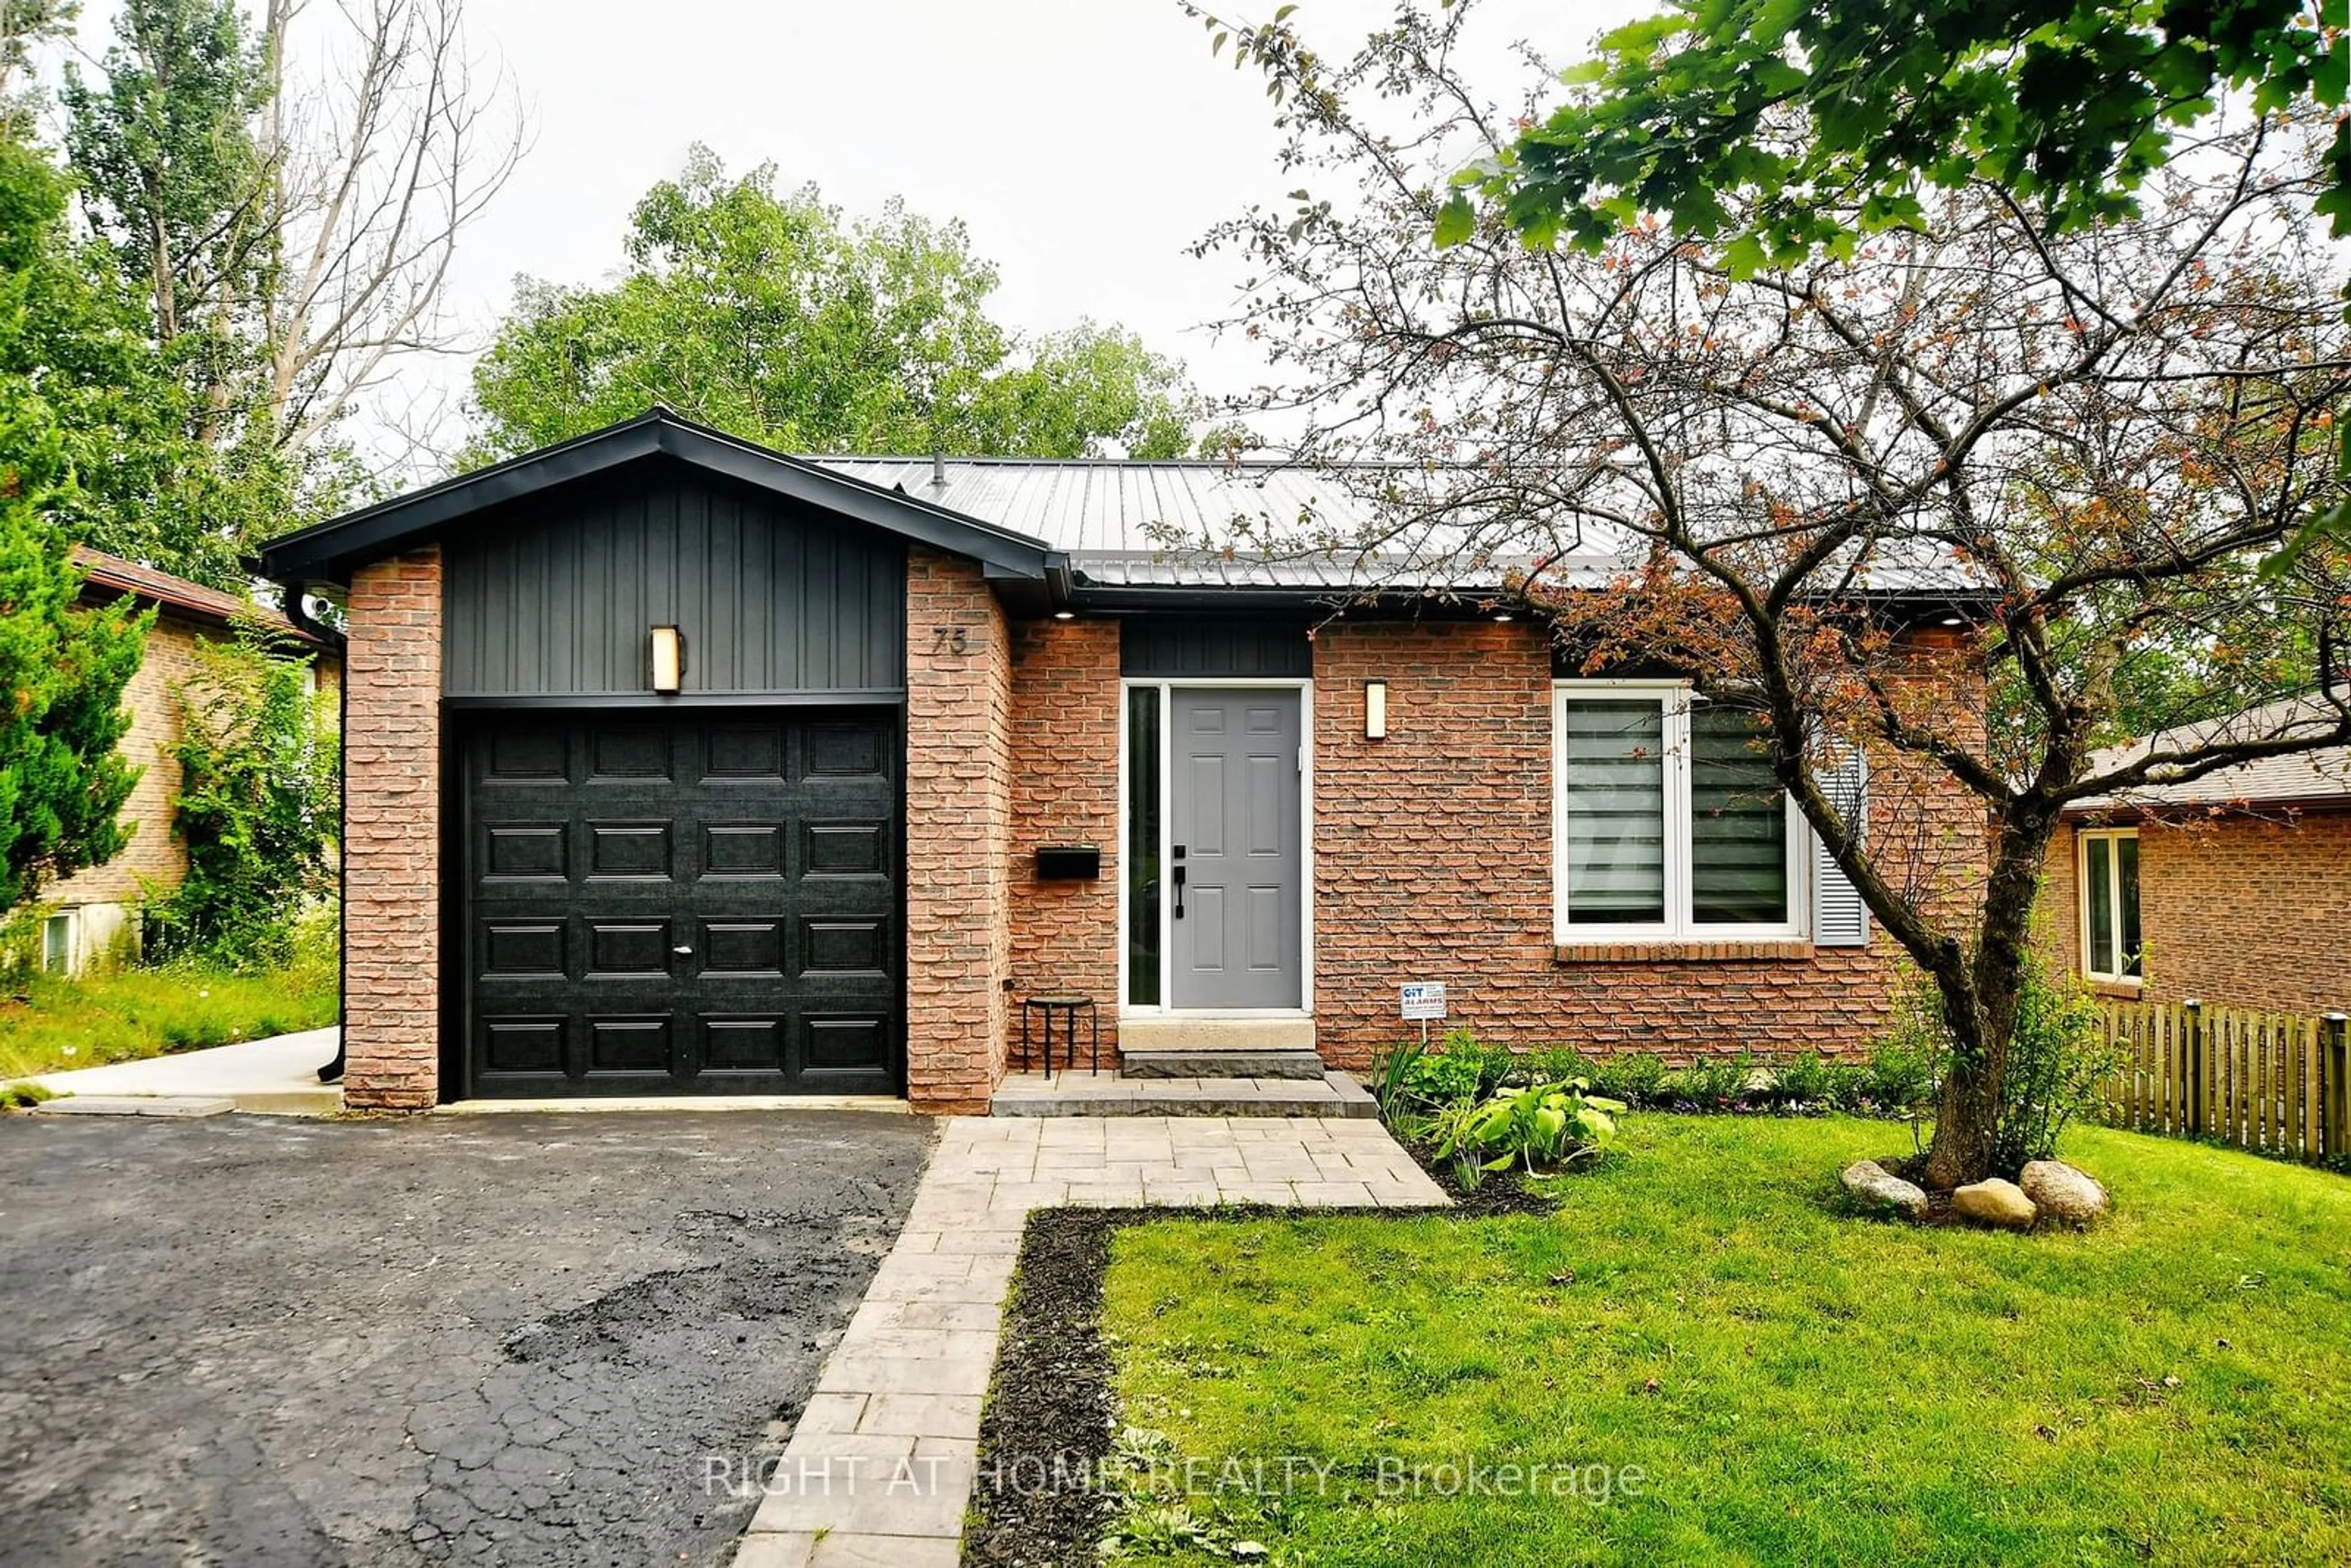 Home with brick exterior material for 75 Fox Run, Barrie Ontario L4N 5L6